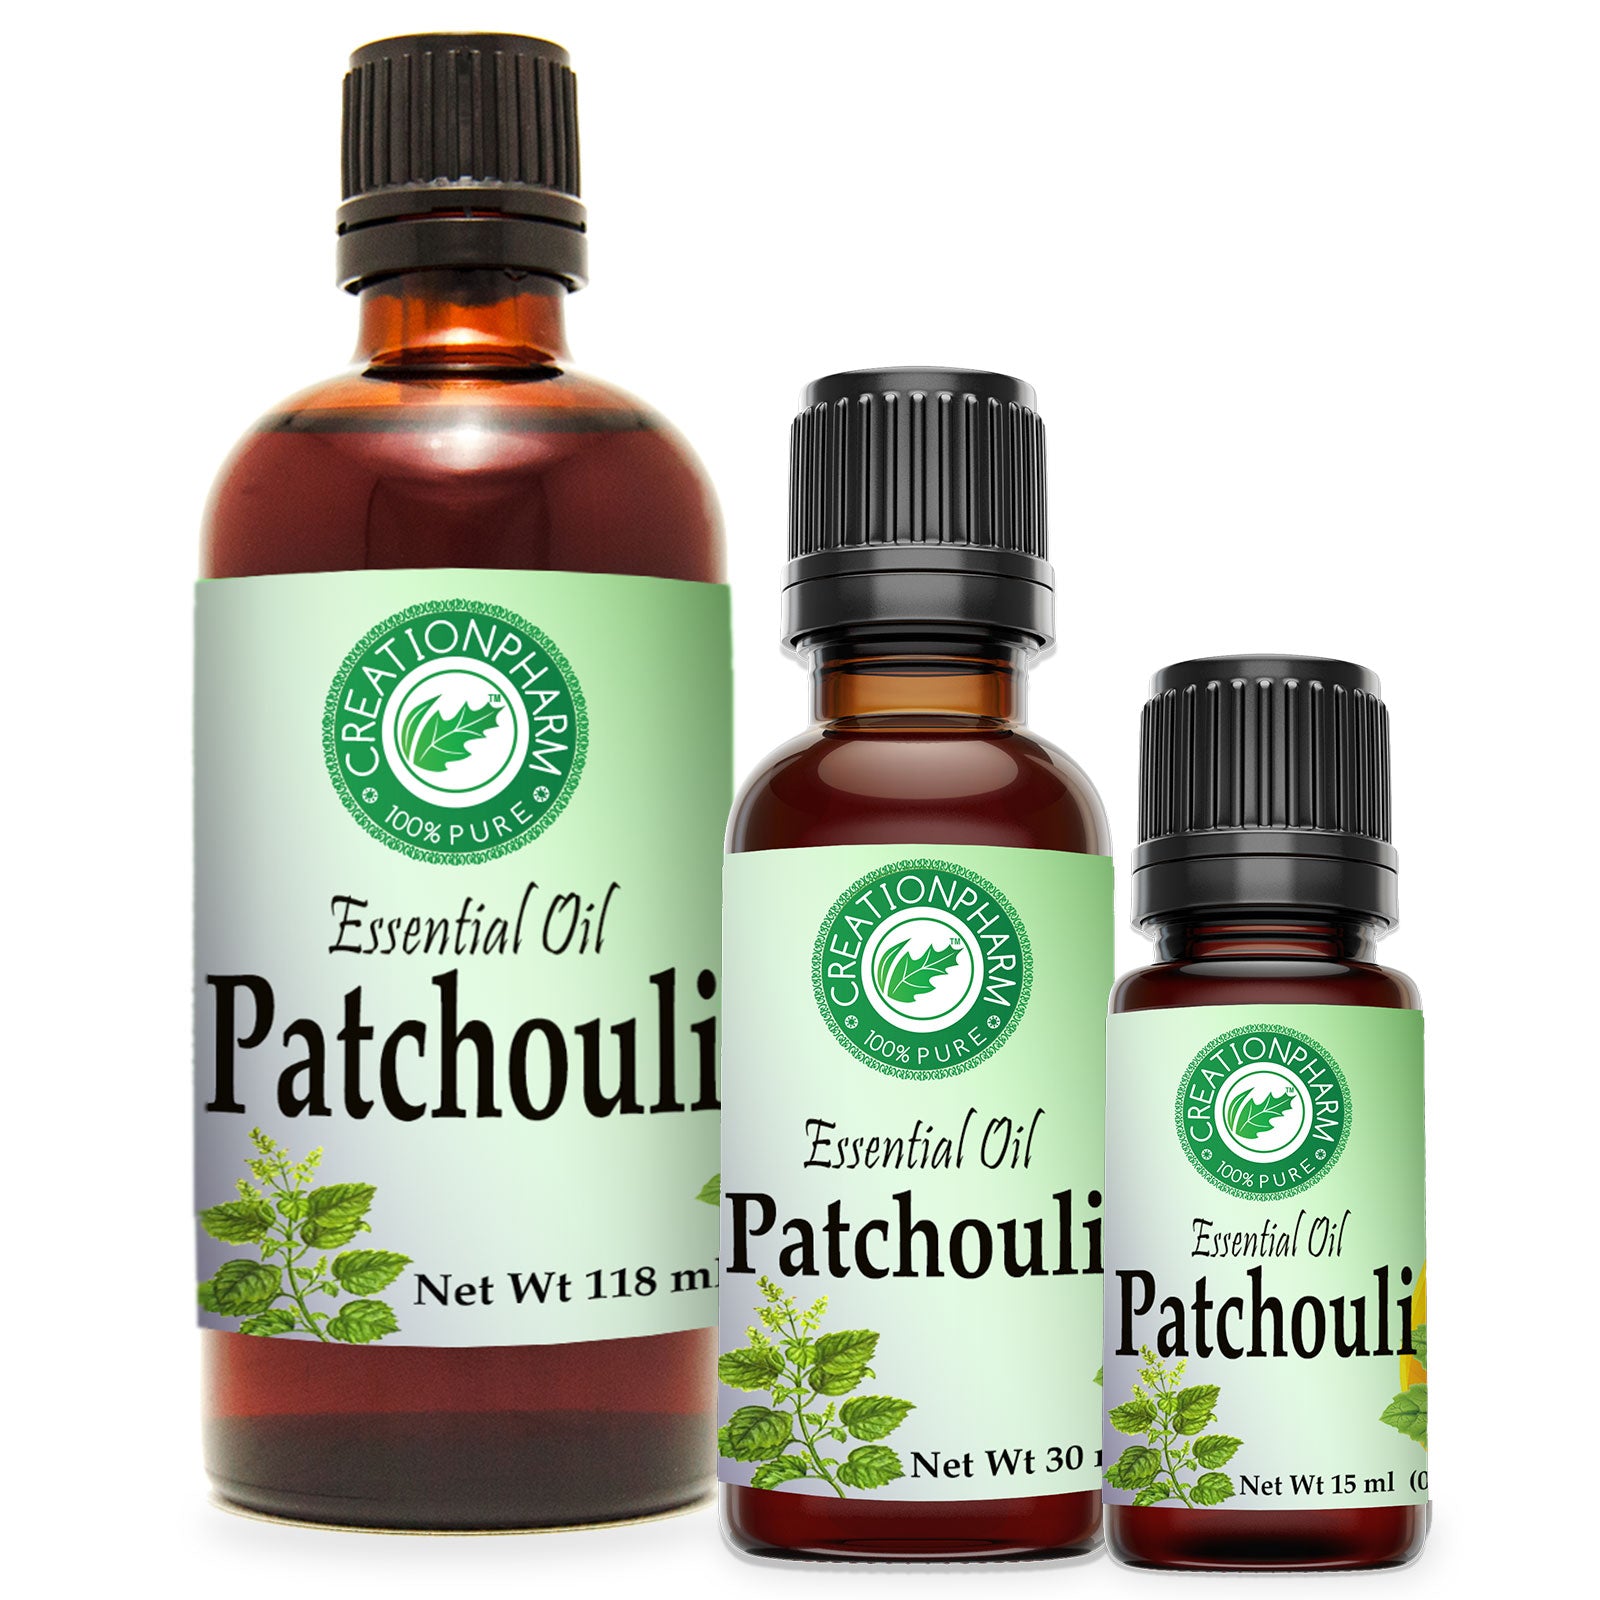 Creation Pharm Patchouli Essential Oil 15 ml - 100% Pure 660335090178A